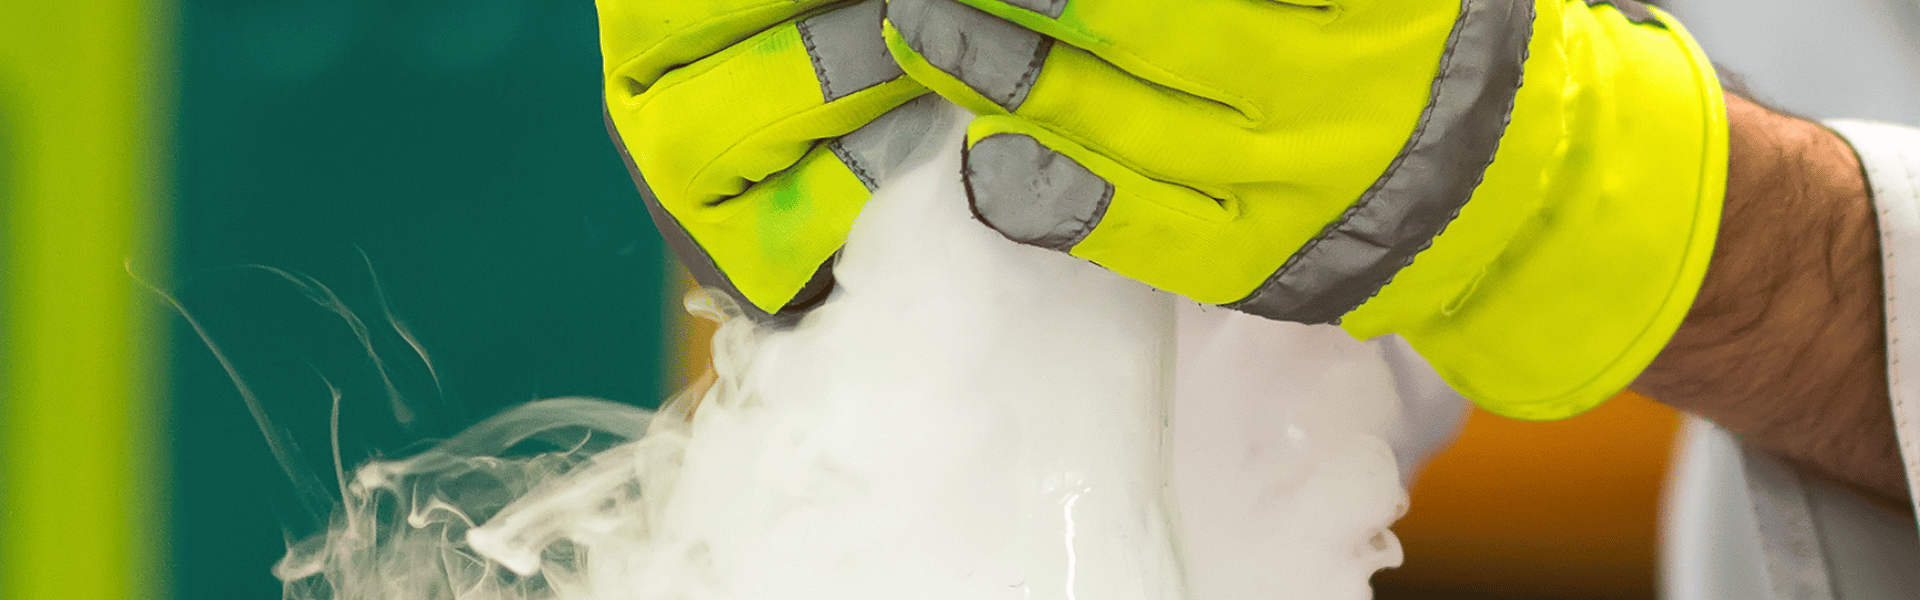 a closeup of working with dry ice